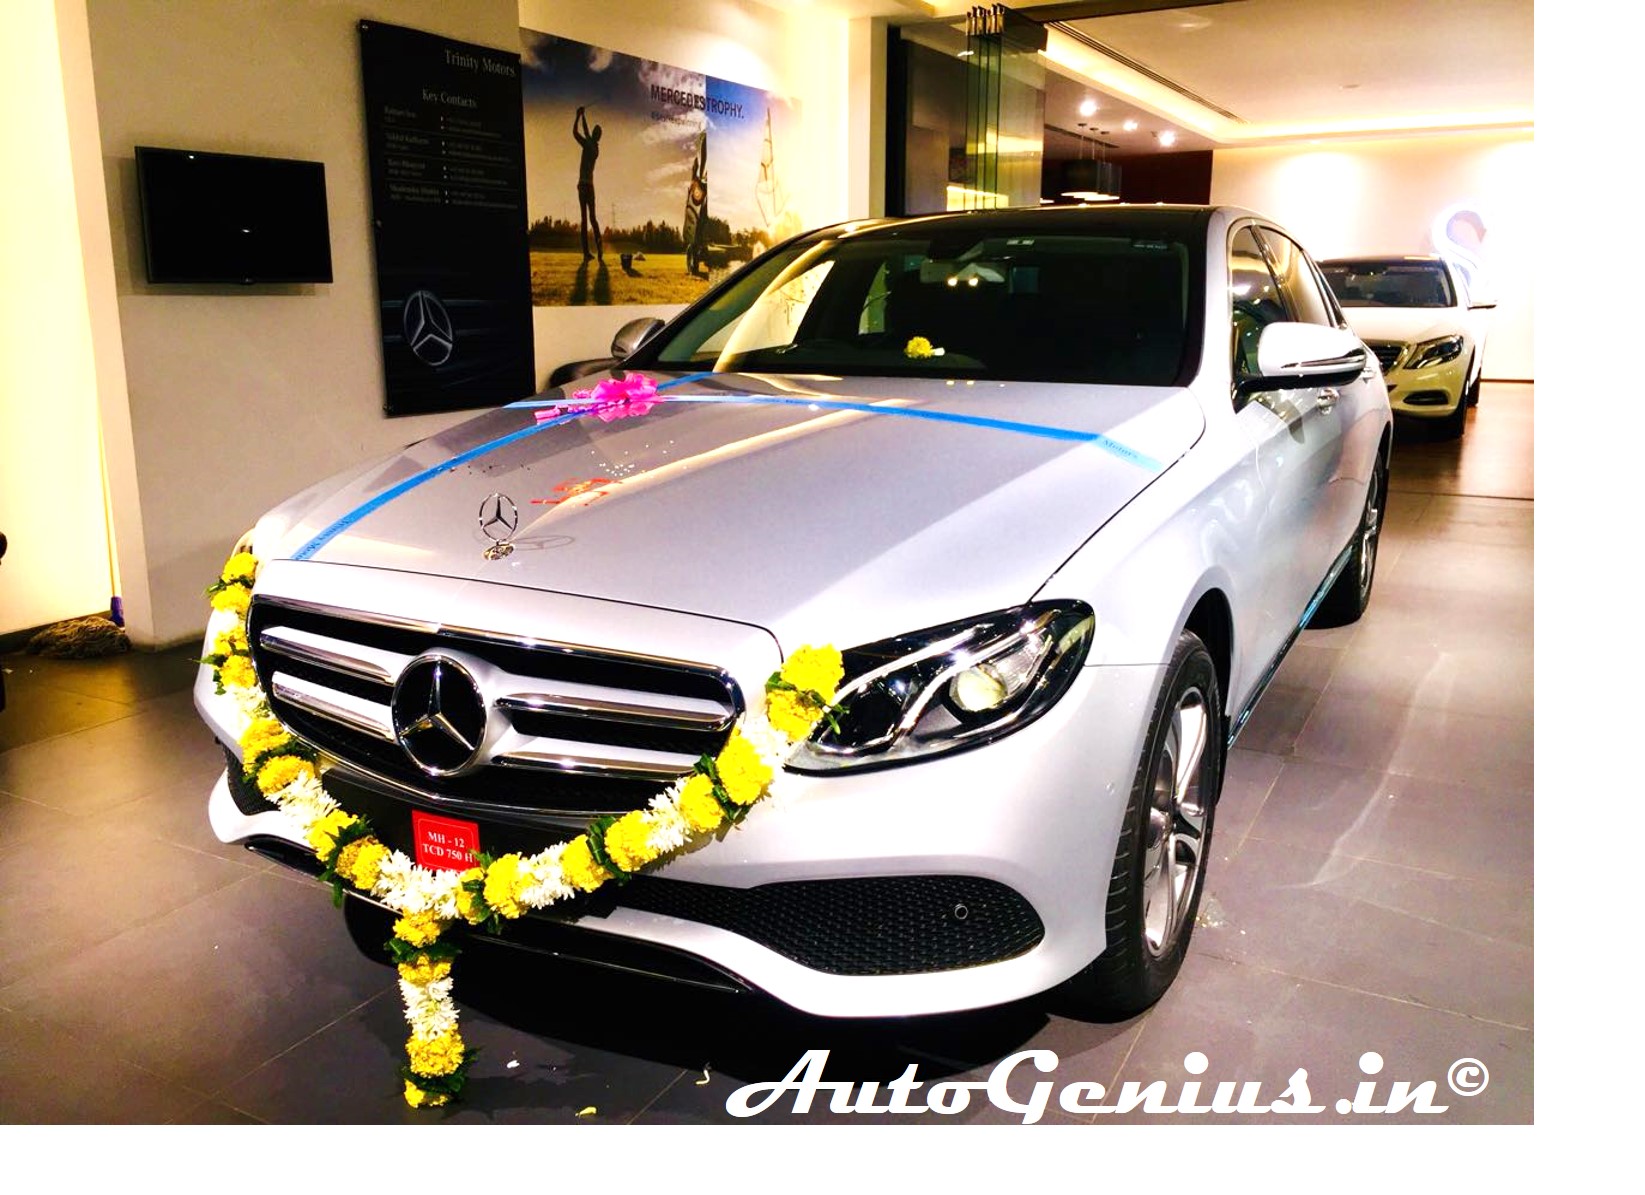 The Director of SIL Mr. Sanjay Shah gets a Mercedes E 220d